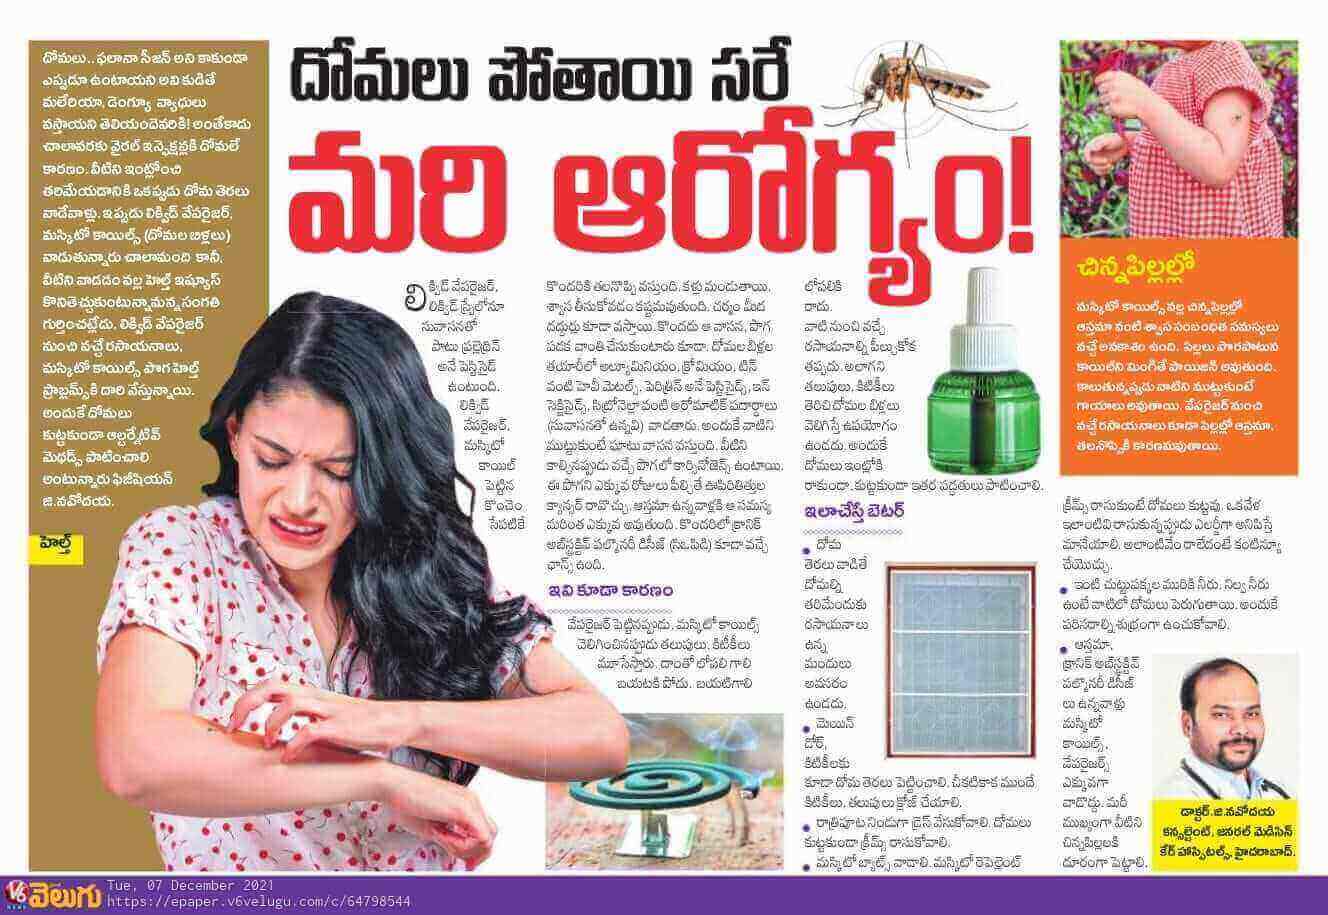 Article on Mosquito Coils and Smoke by Dr. Navodaya Gilla - Consultant General Medicine